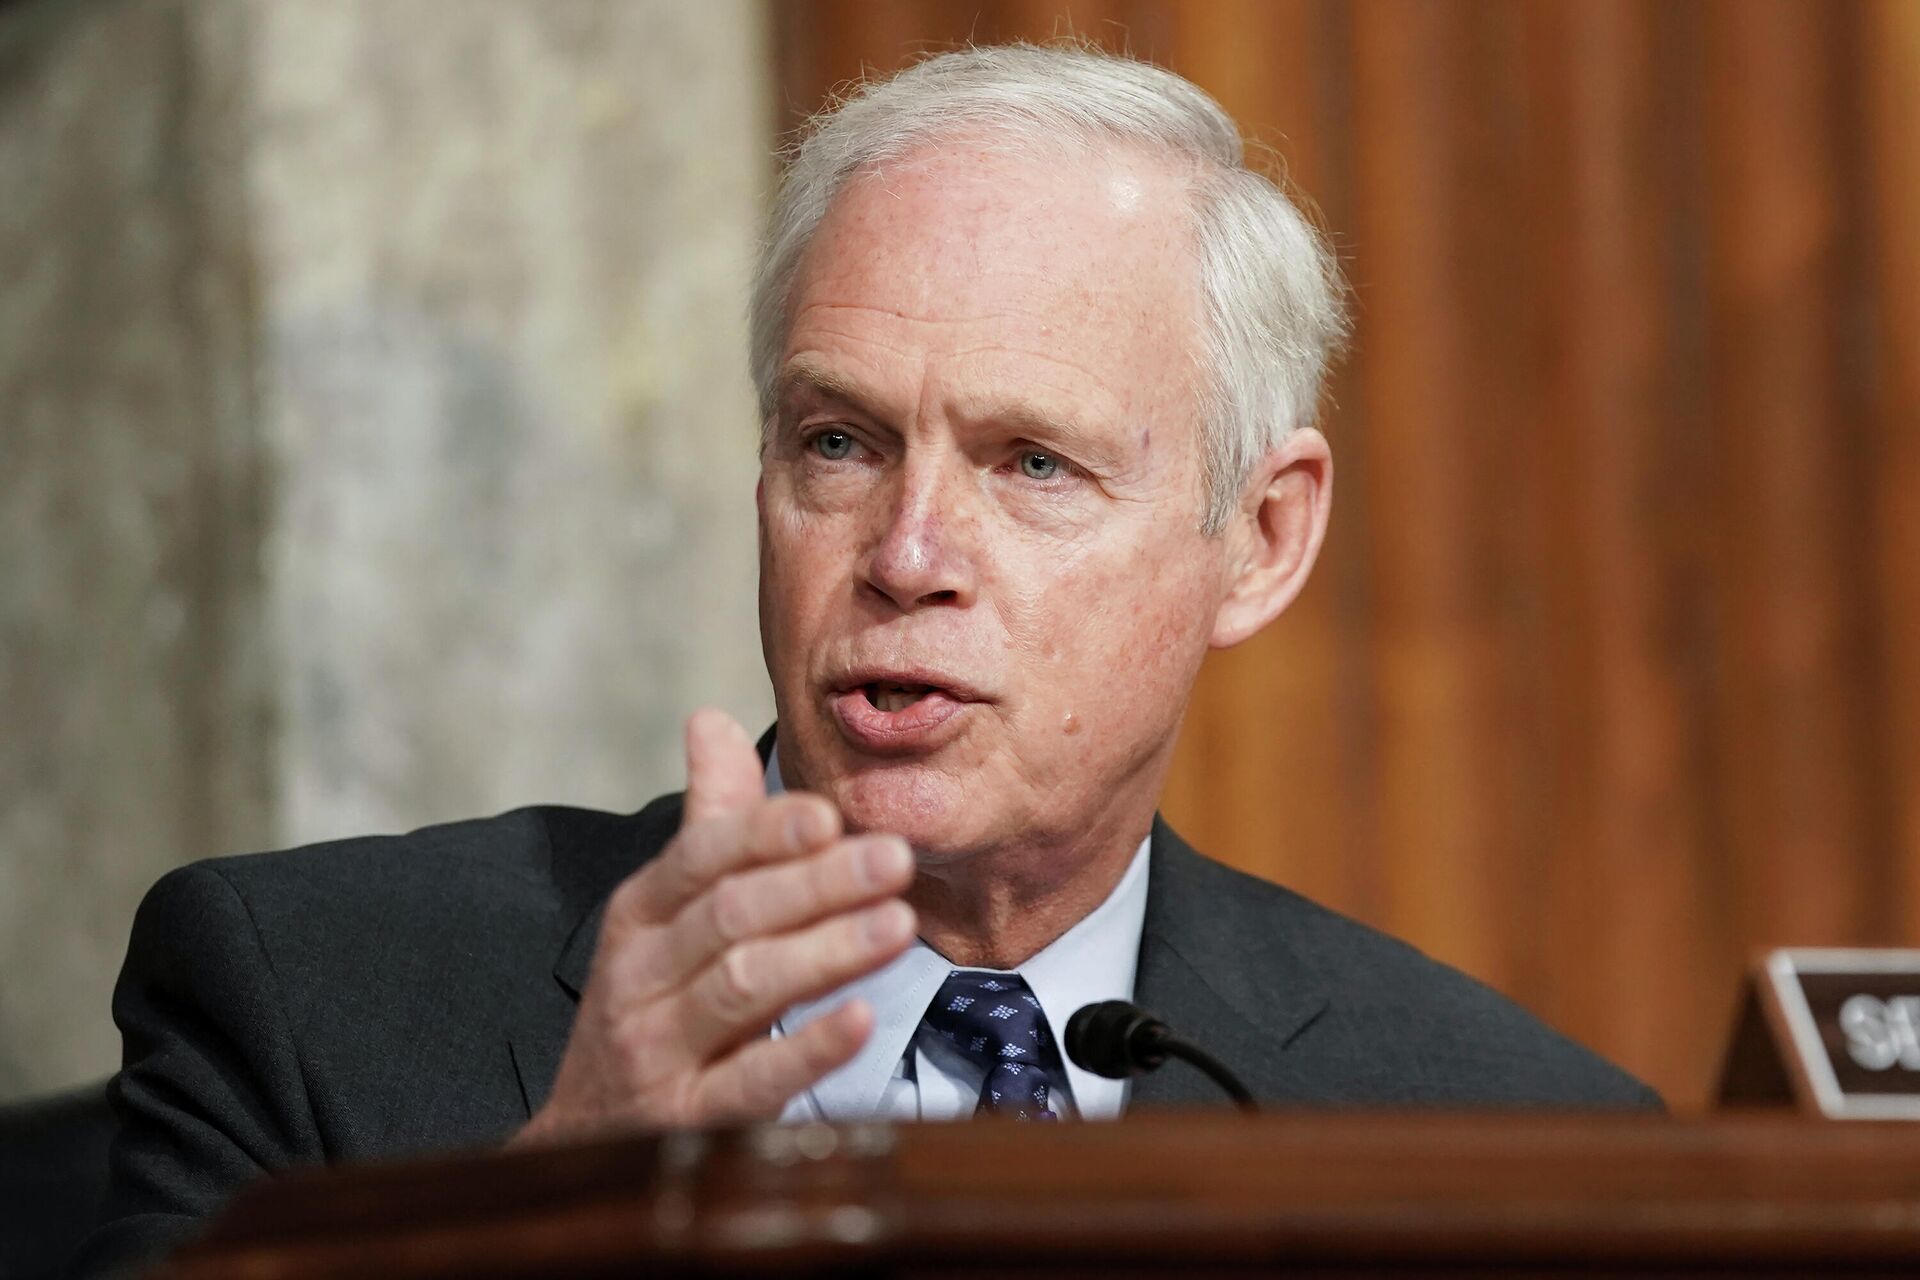 Sen. Ron Johnson, R-Wis., speaks at the U.S. Capitol in Washington in this March 3, 2021 file photo. Wisconsin Republicans are working to discredit the bipartisan system they created to run elections in the state after President Joe Biden narrowly won last year's presidential race, making the political battleground state the latest front in the national push by the GOP to exert more control over elections. - Sputnik International, 1920, 05.12.2021